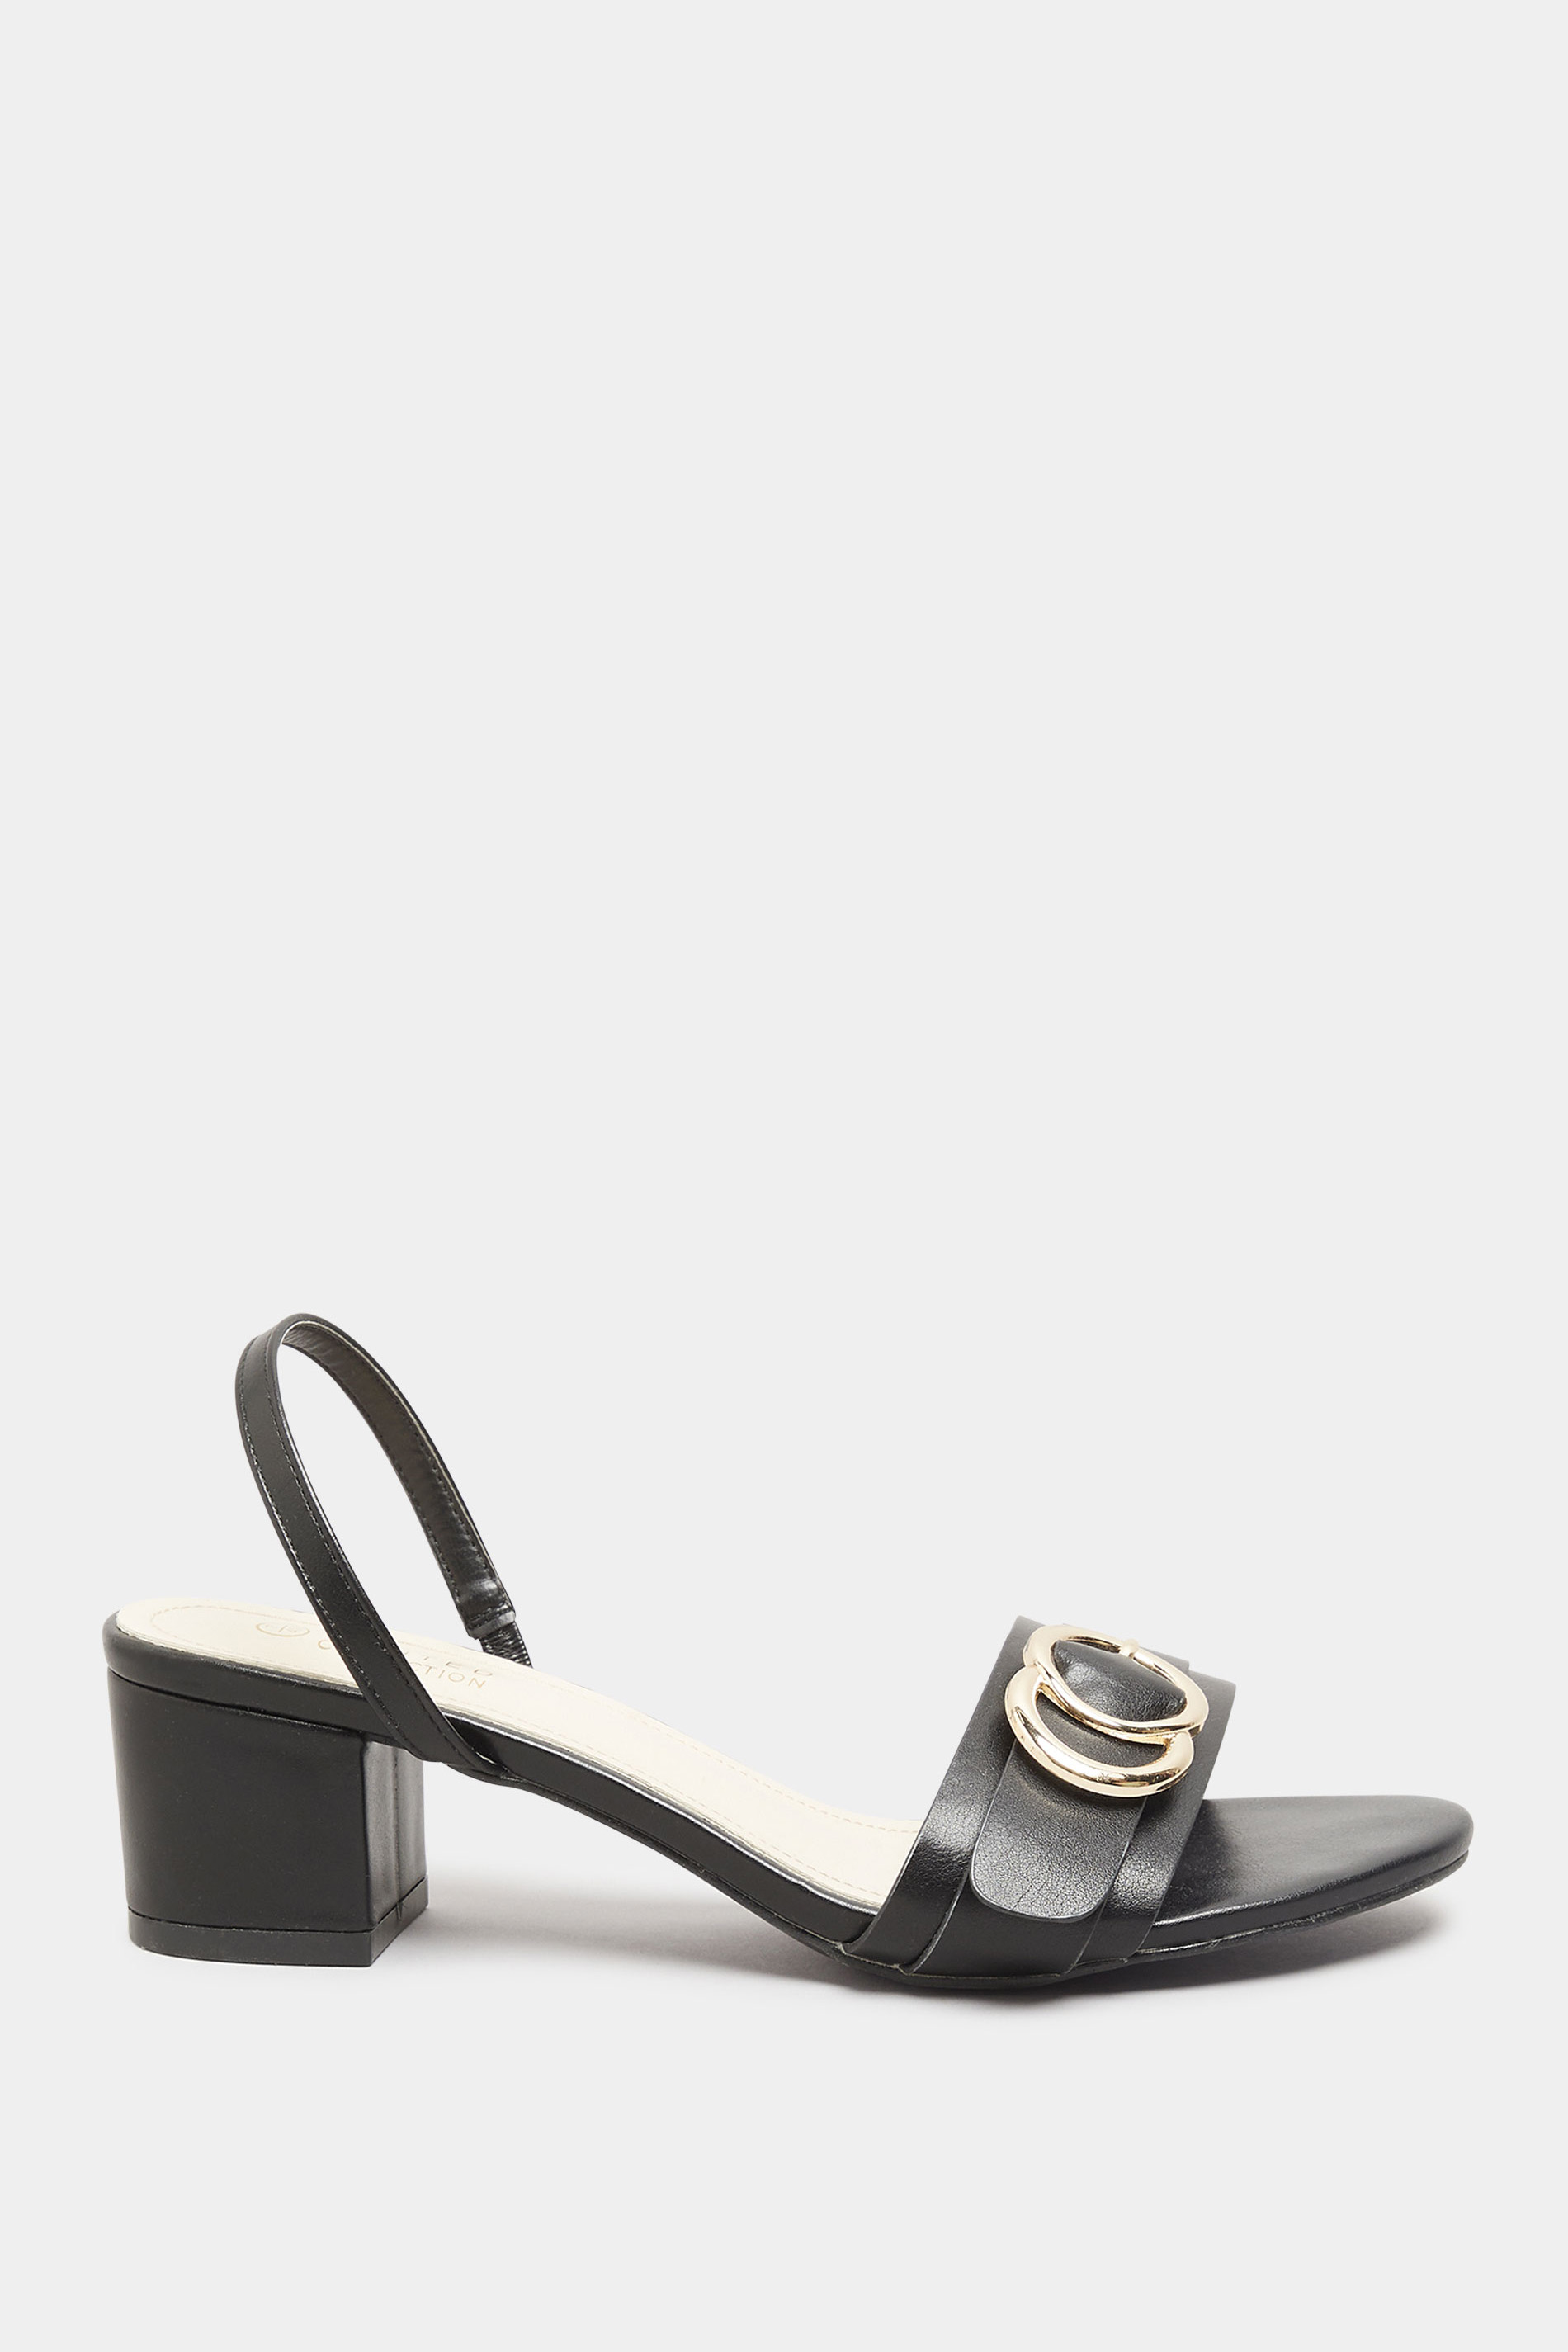 LIMITED COLLECTION Black Buckle Block Heeled Sandal In Wide E Fit & Extra Wide EEE Fit 3